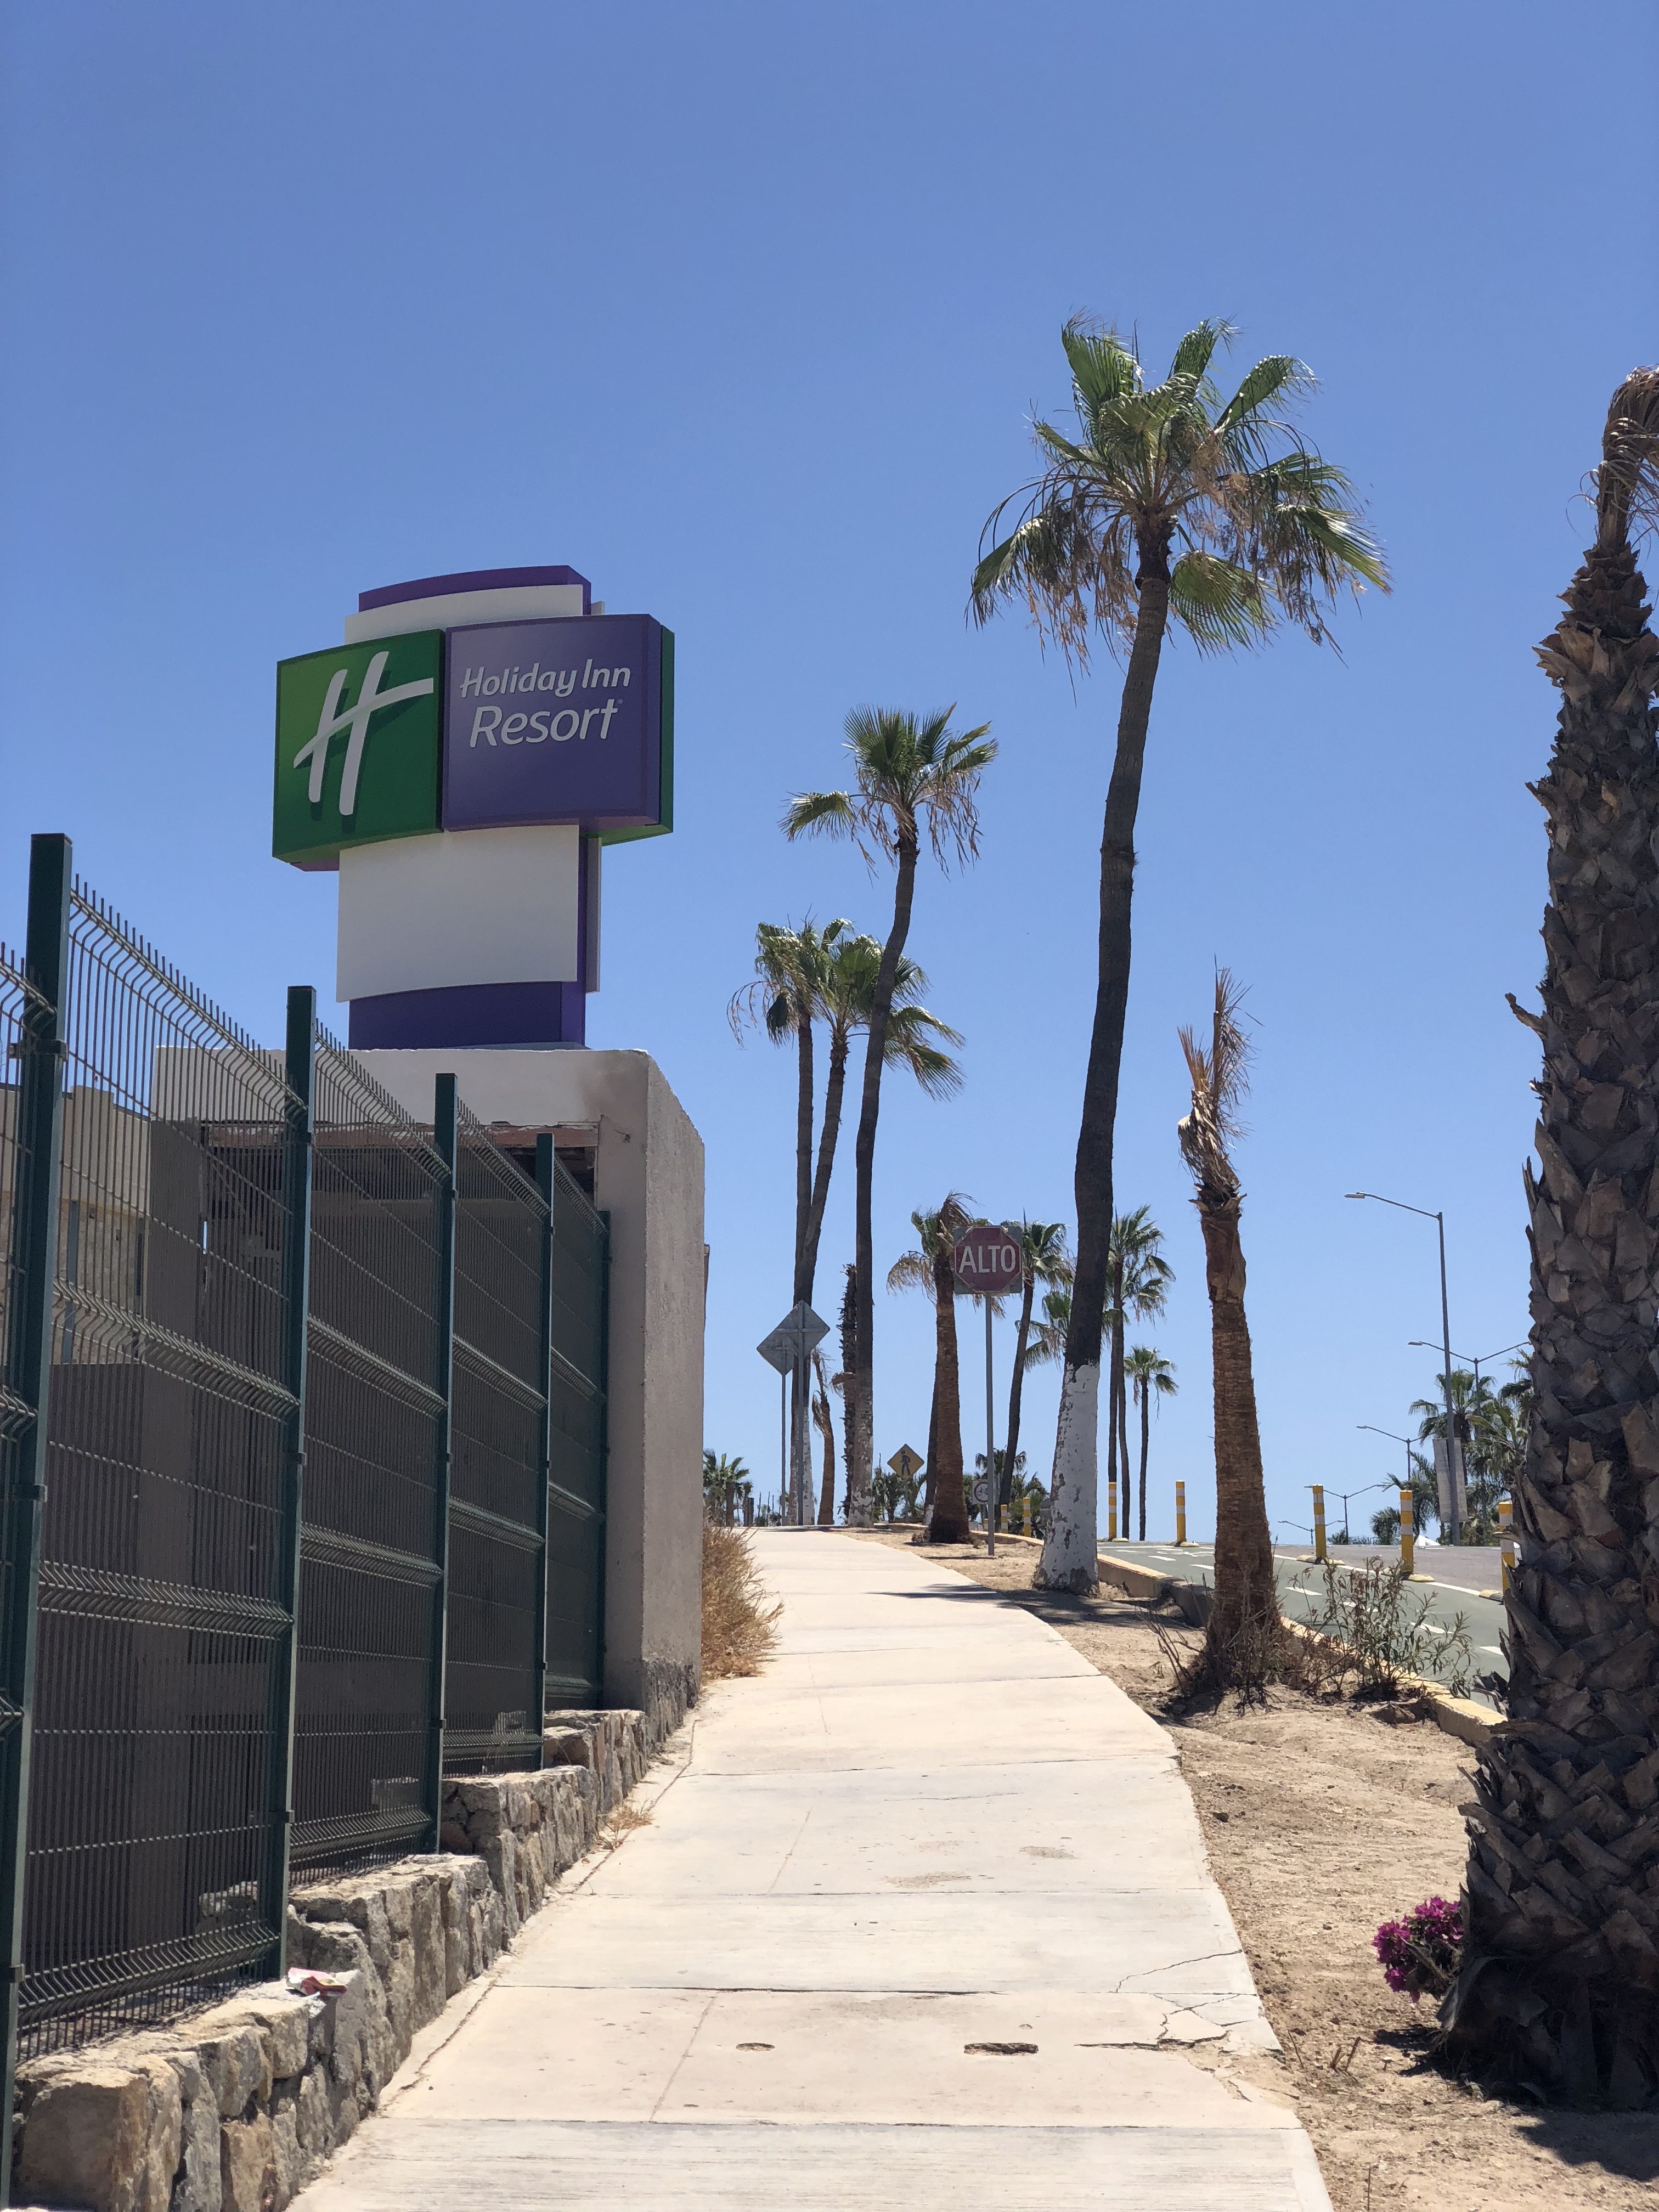 a sidewalk with palm trees and a sign